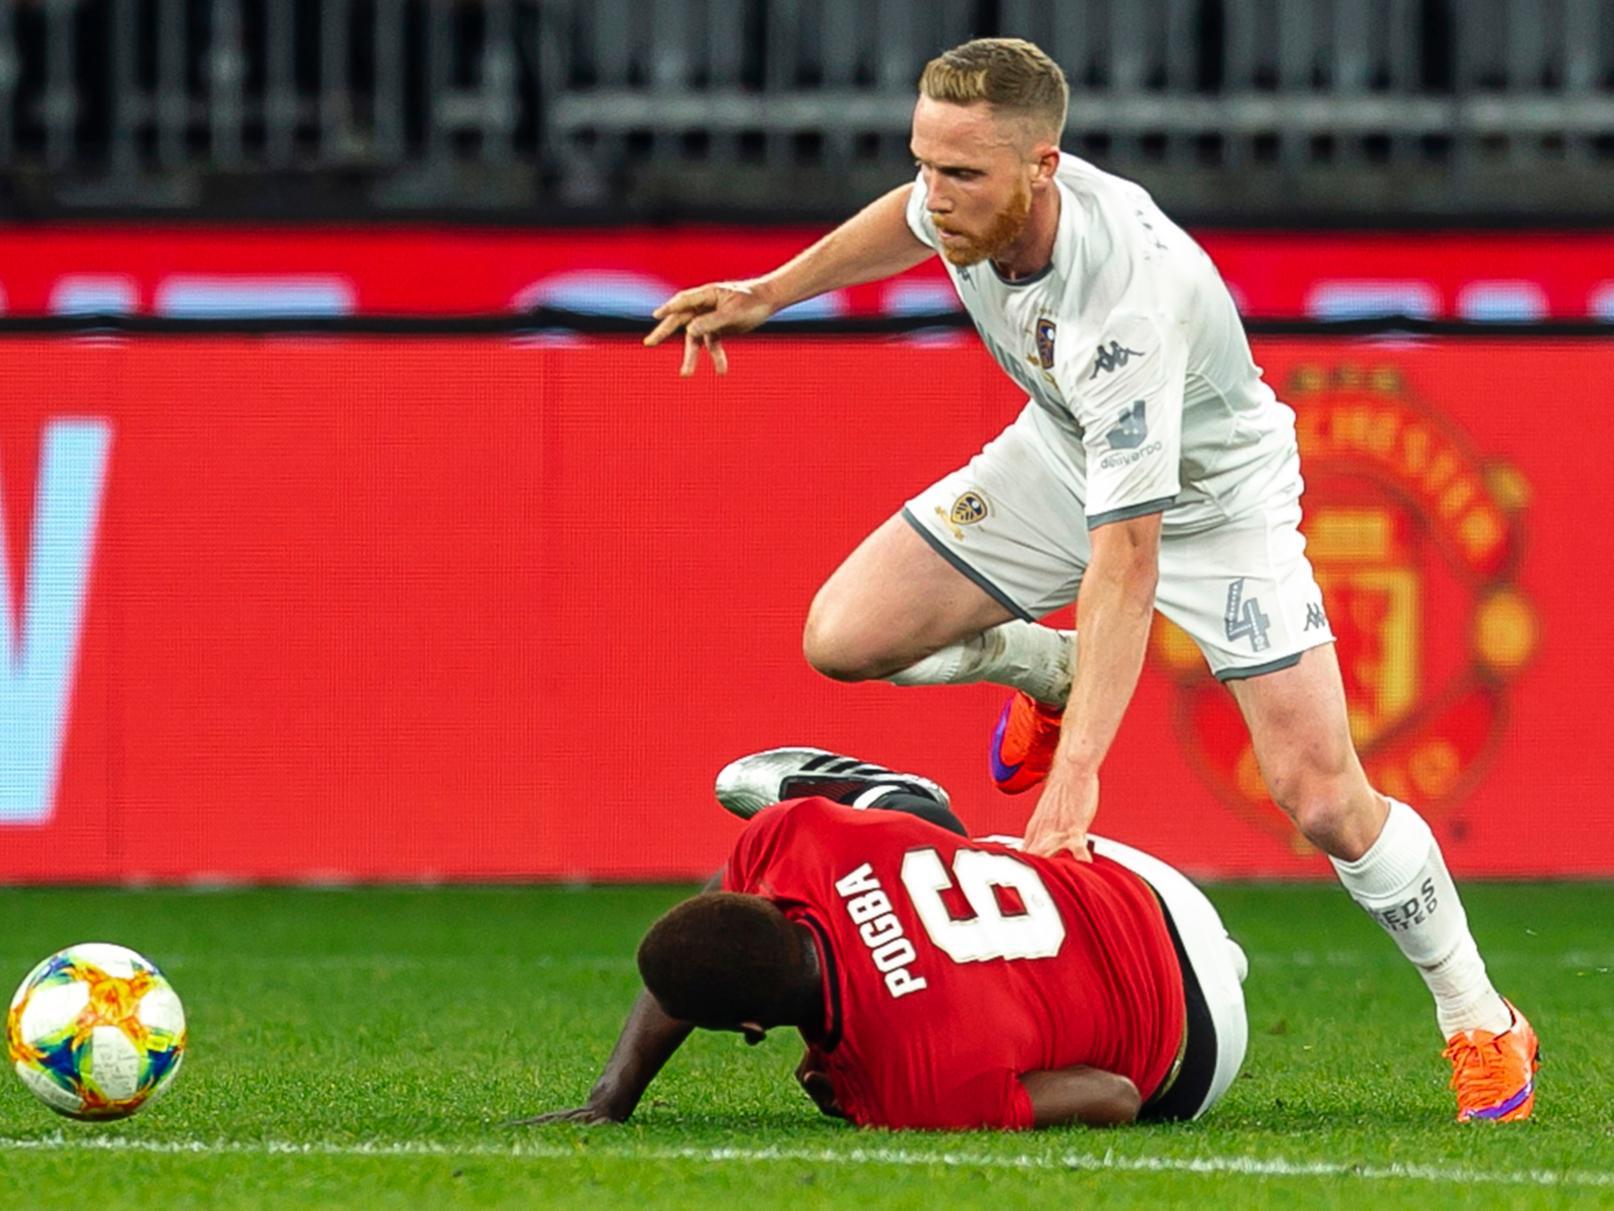 Leeds midfielder Adam Forshaw has played his last game of the 2019/20 campaign, after the club confirmed that he will be required to undergo hip surgery in order for him to be back for pre-season training. (Club official website)